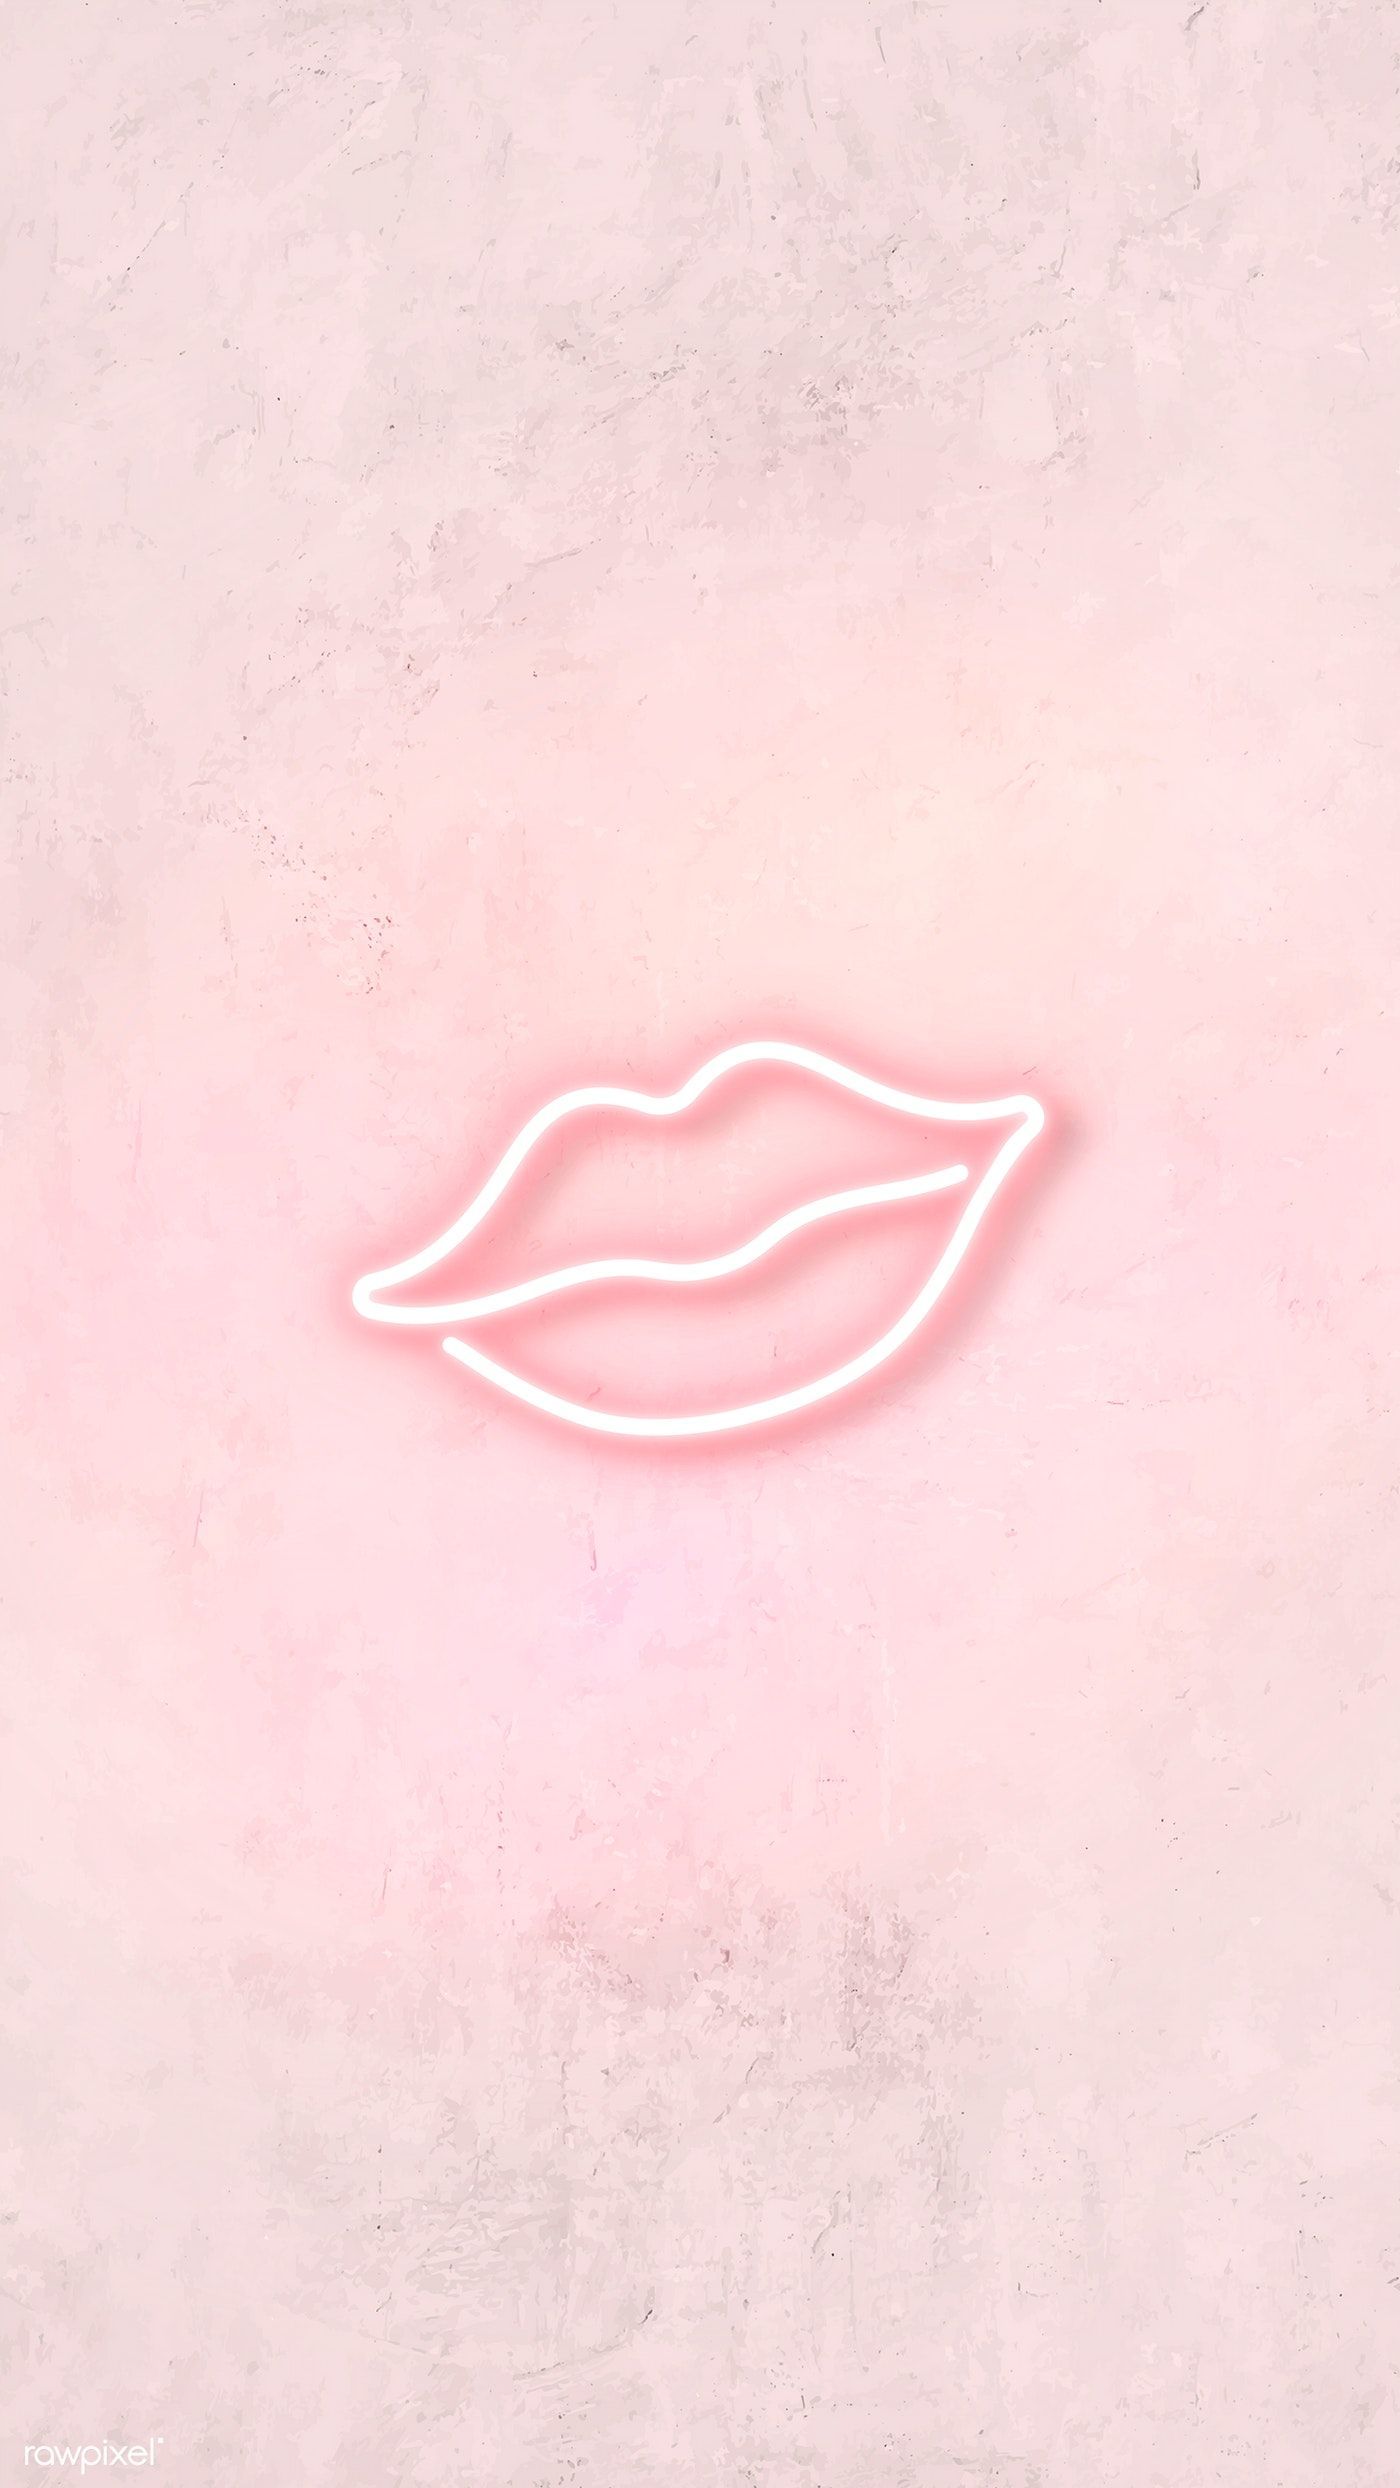 Neon light kiss sign on pink background .com